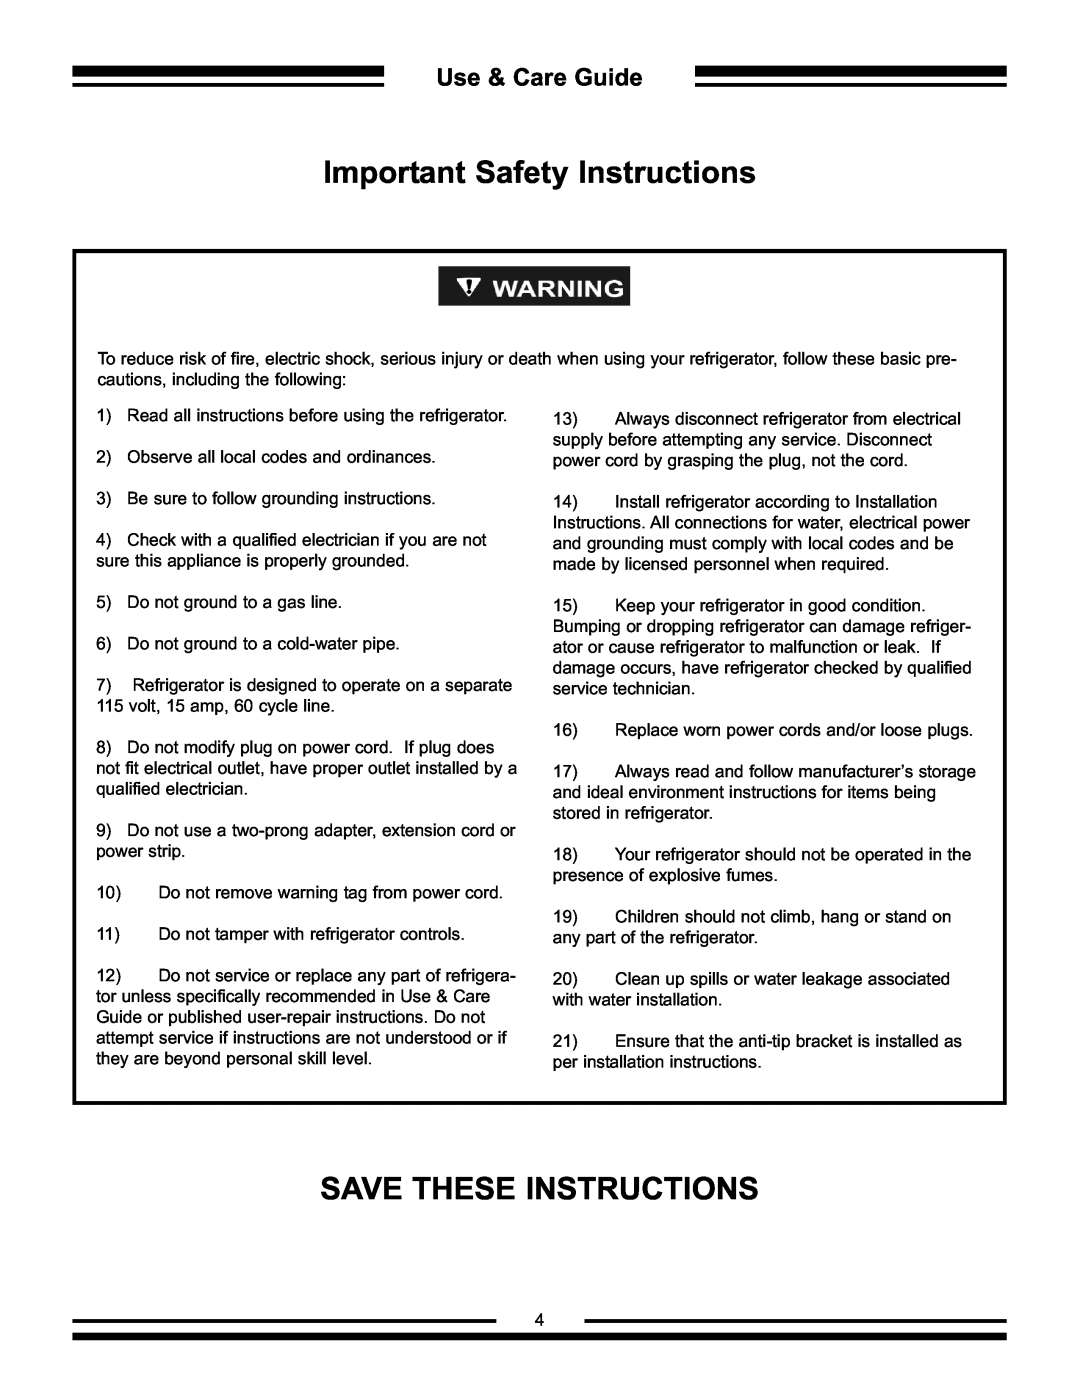 Aga Ranges AFHR-36 manual Important Safety Instructions, Save These Instructions, Use & Care Guide 